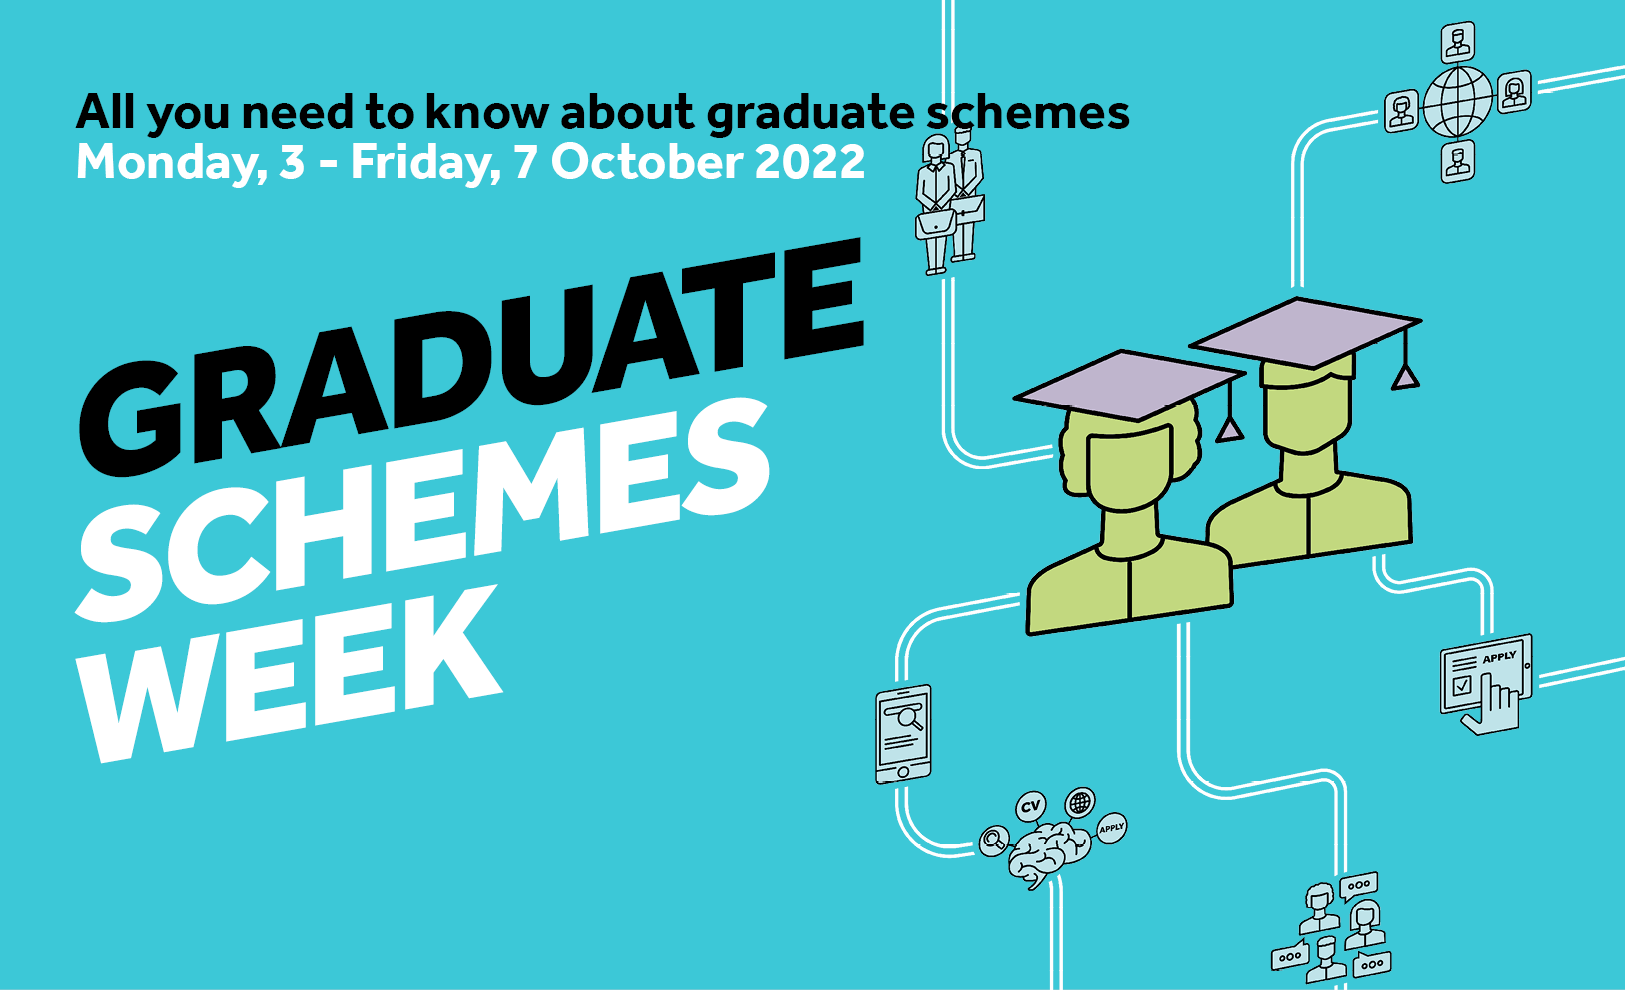 Styalised image of 2 graduates on a path with other images intersecting. Wording reads: All you need to know about graduate shenmes mon 3rd - Fri 7th October - Grad schemes week